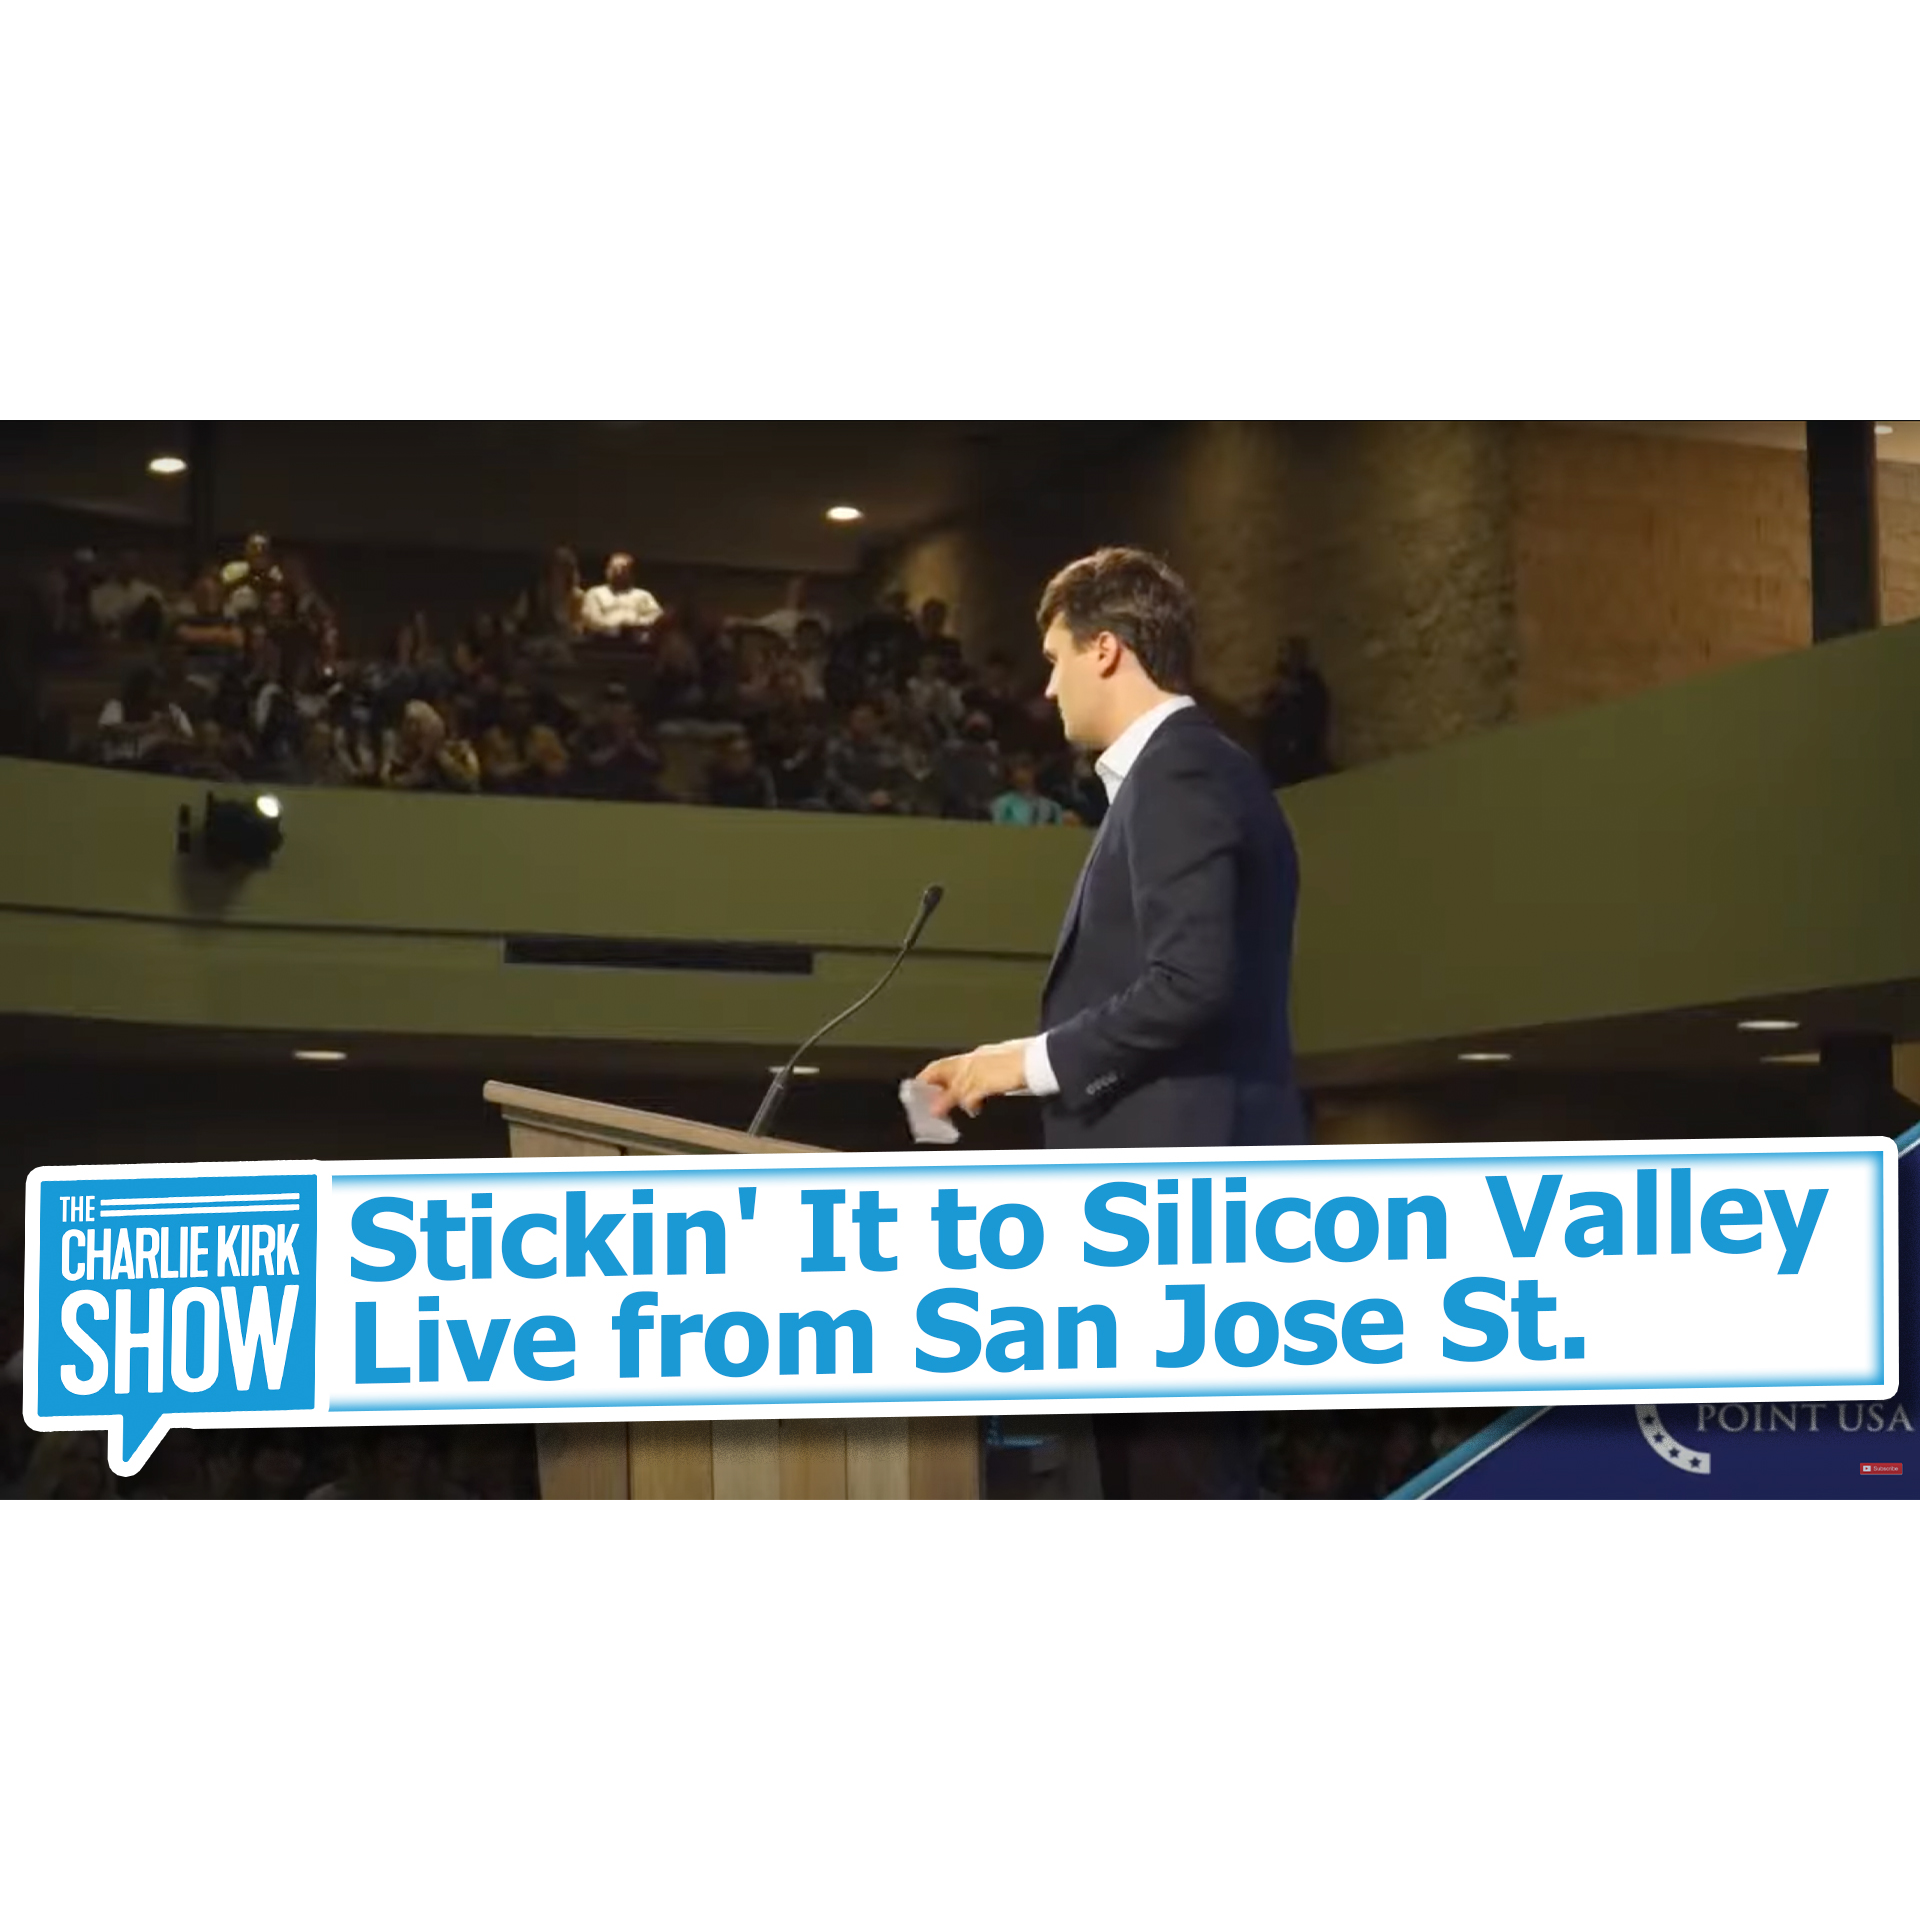 Stickin' It to Silicon Valley—Live from San Jose St.